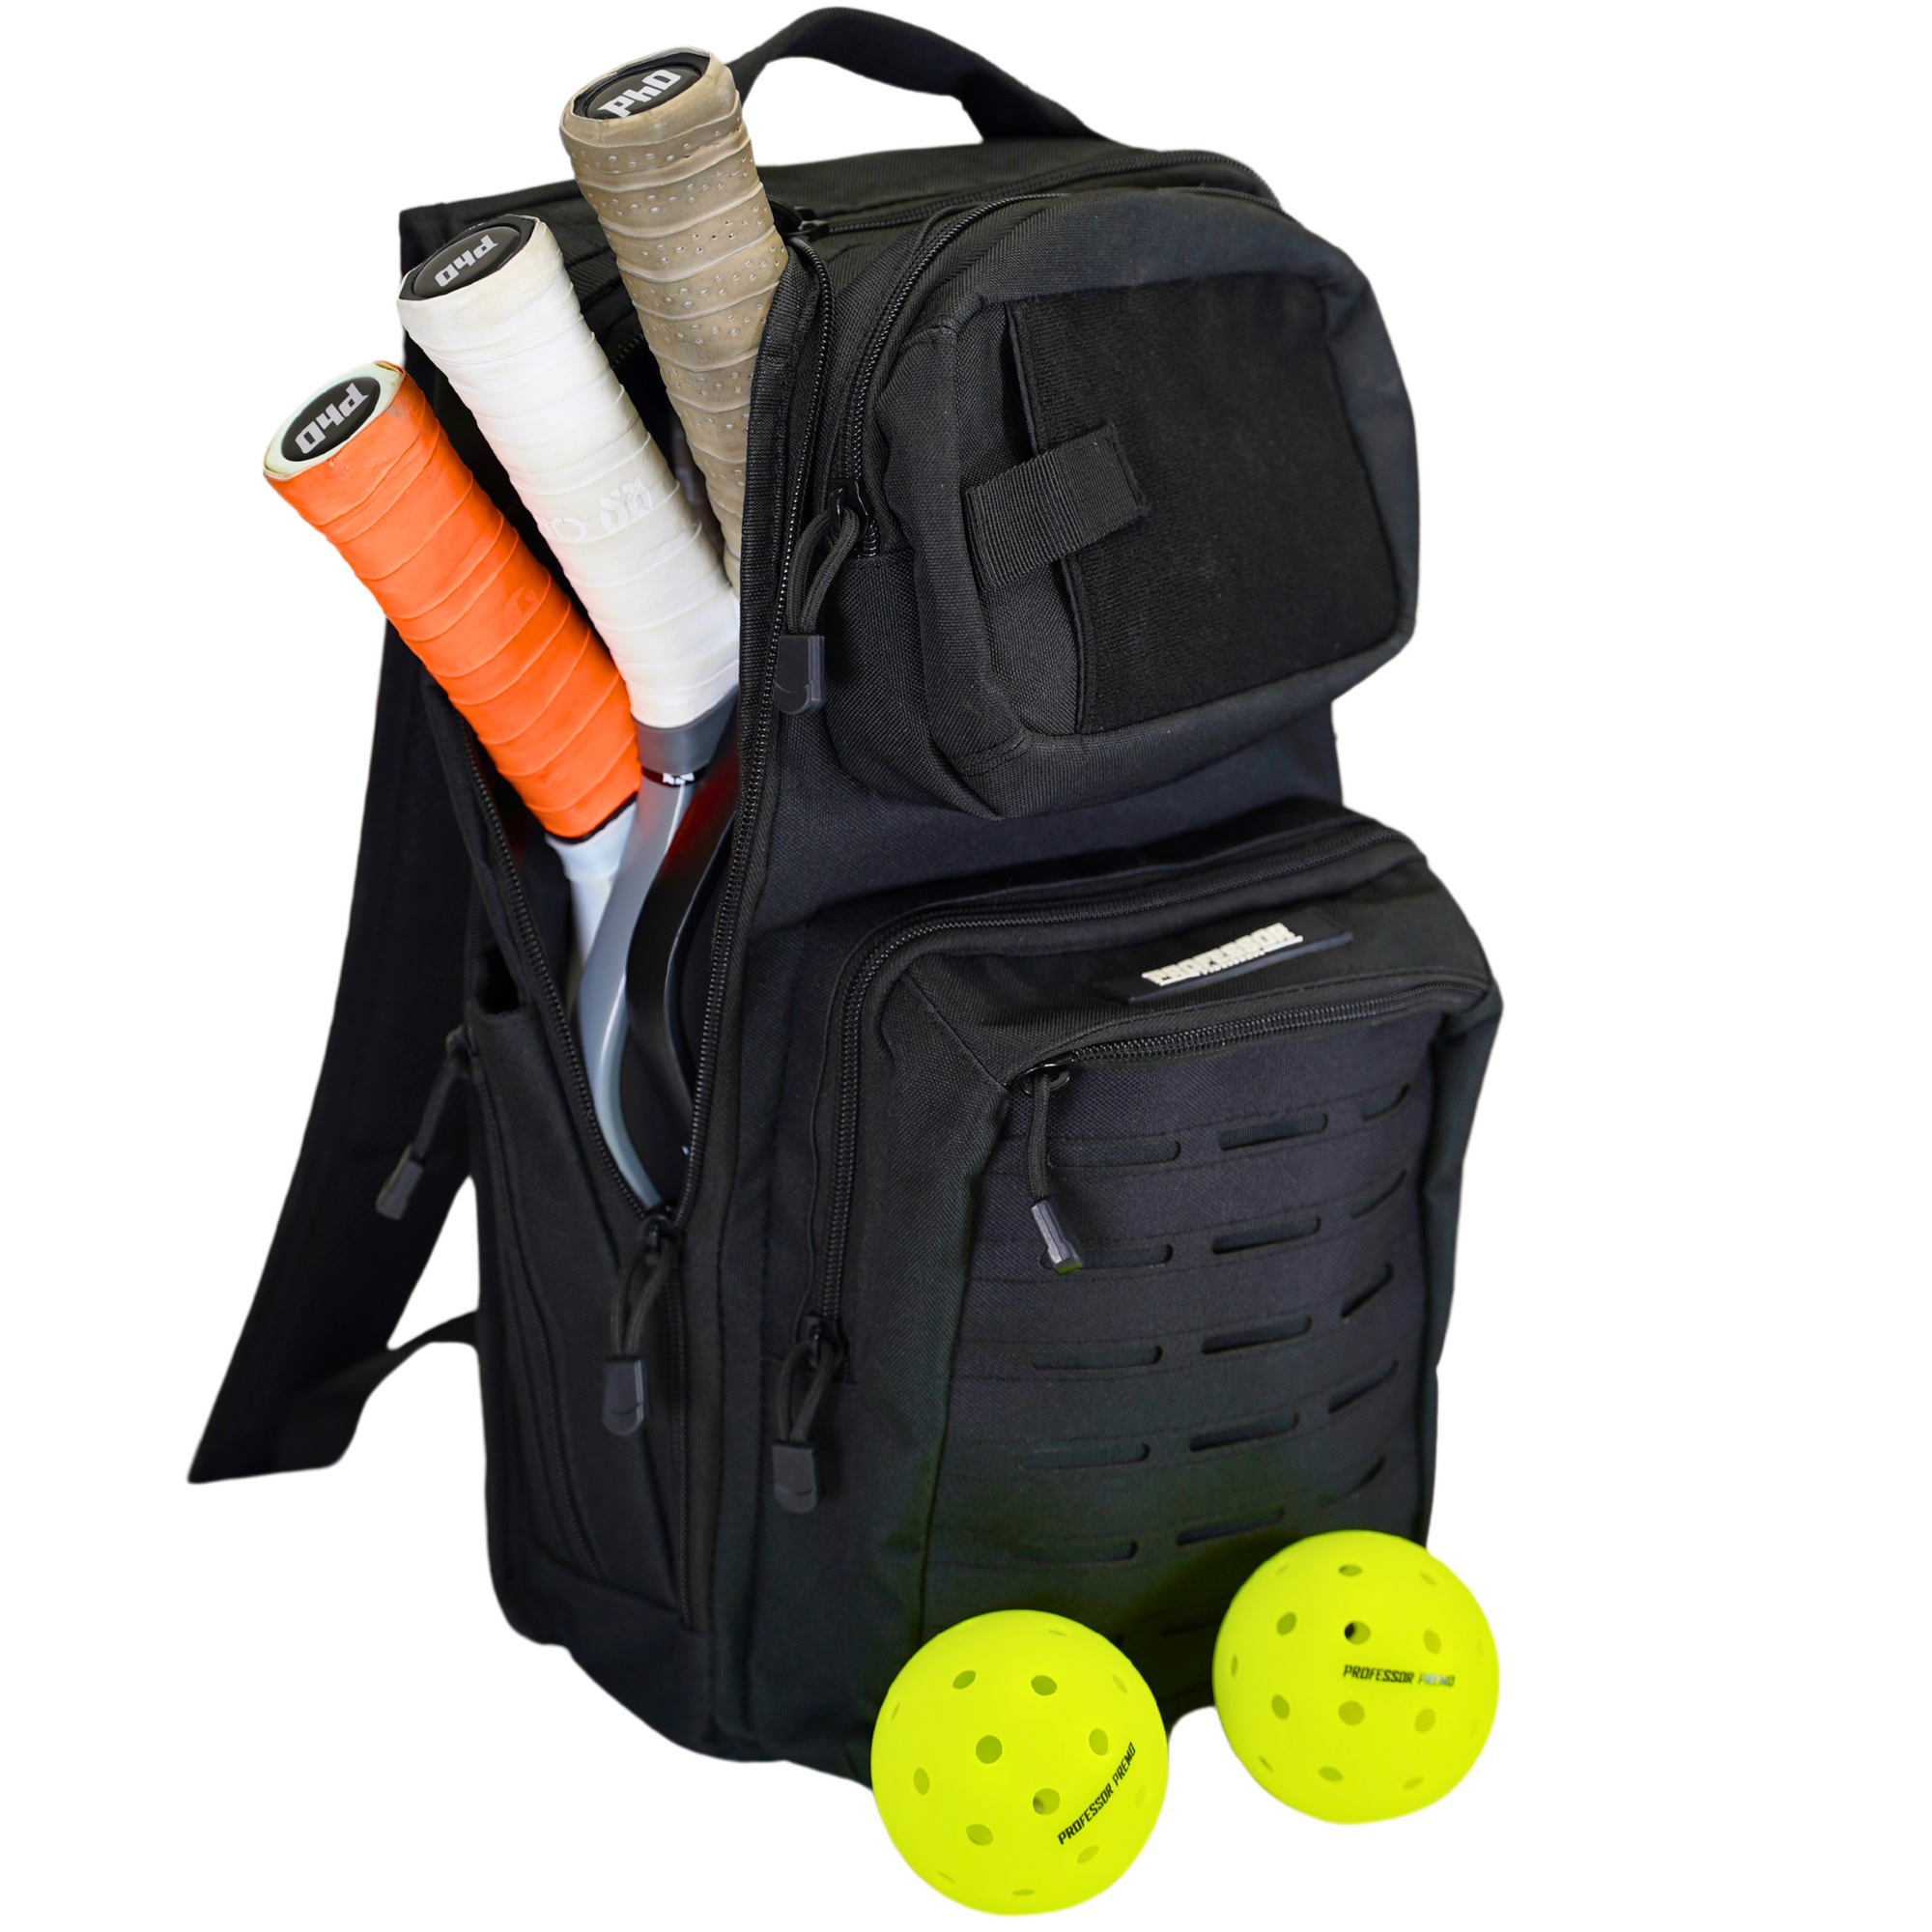 CourtCommander Pickleball Backpack - Fits 5 Paddles